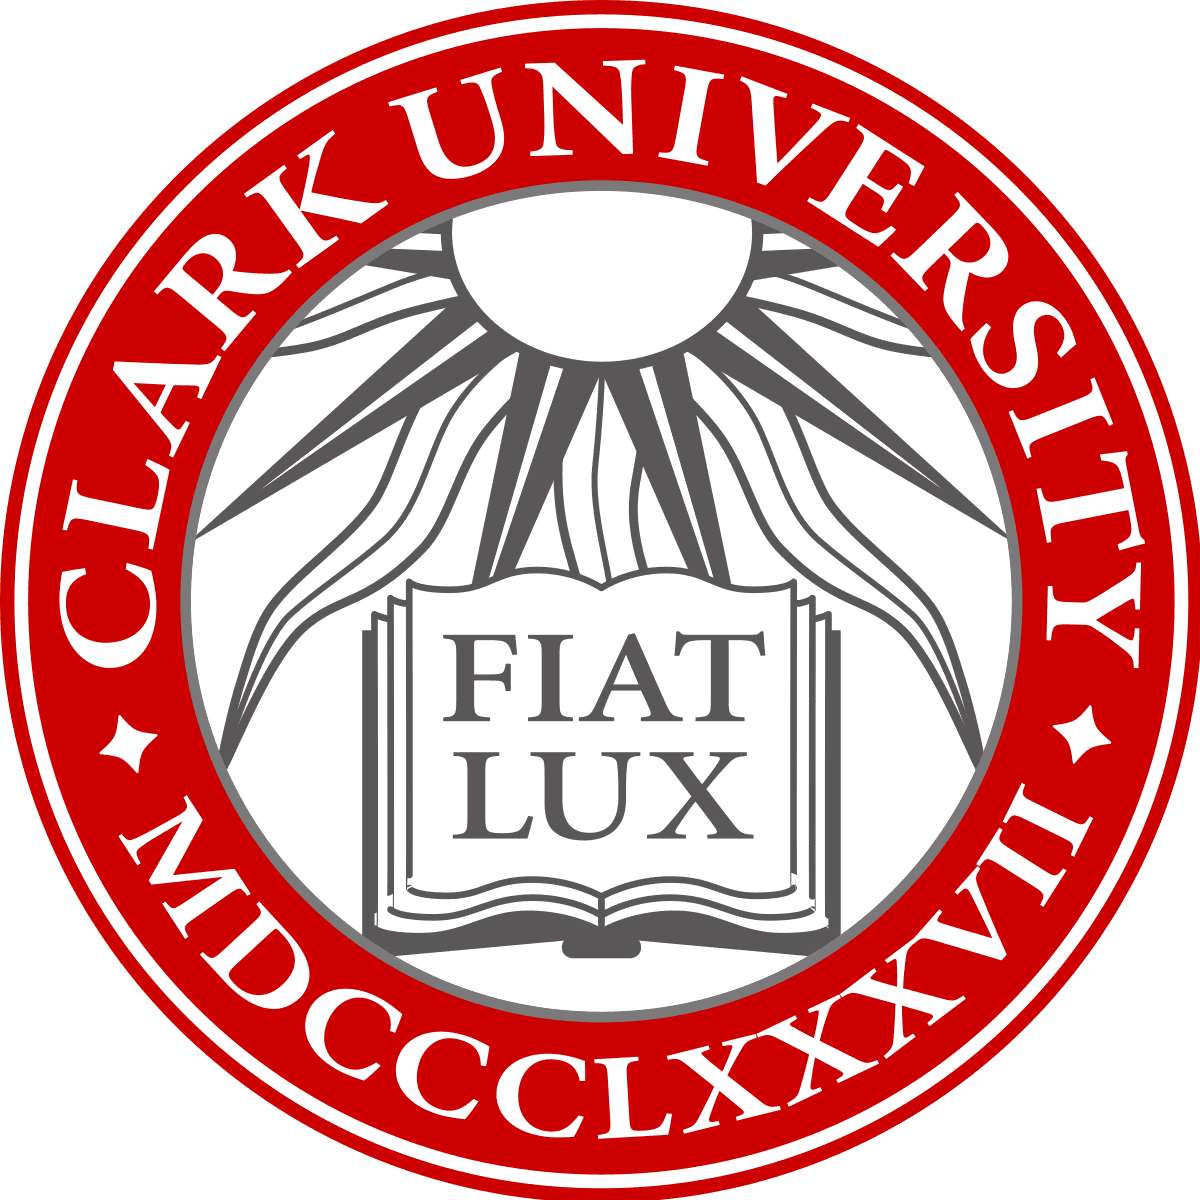 Clark sued again for its handling of sexual misconduct allegations